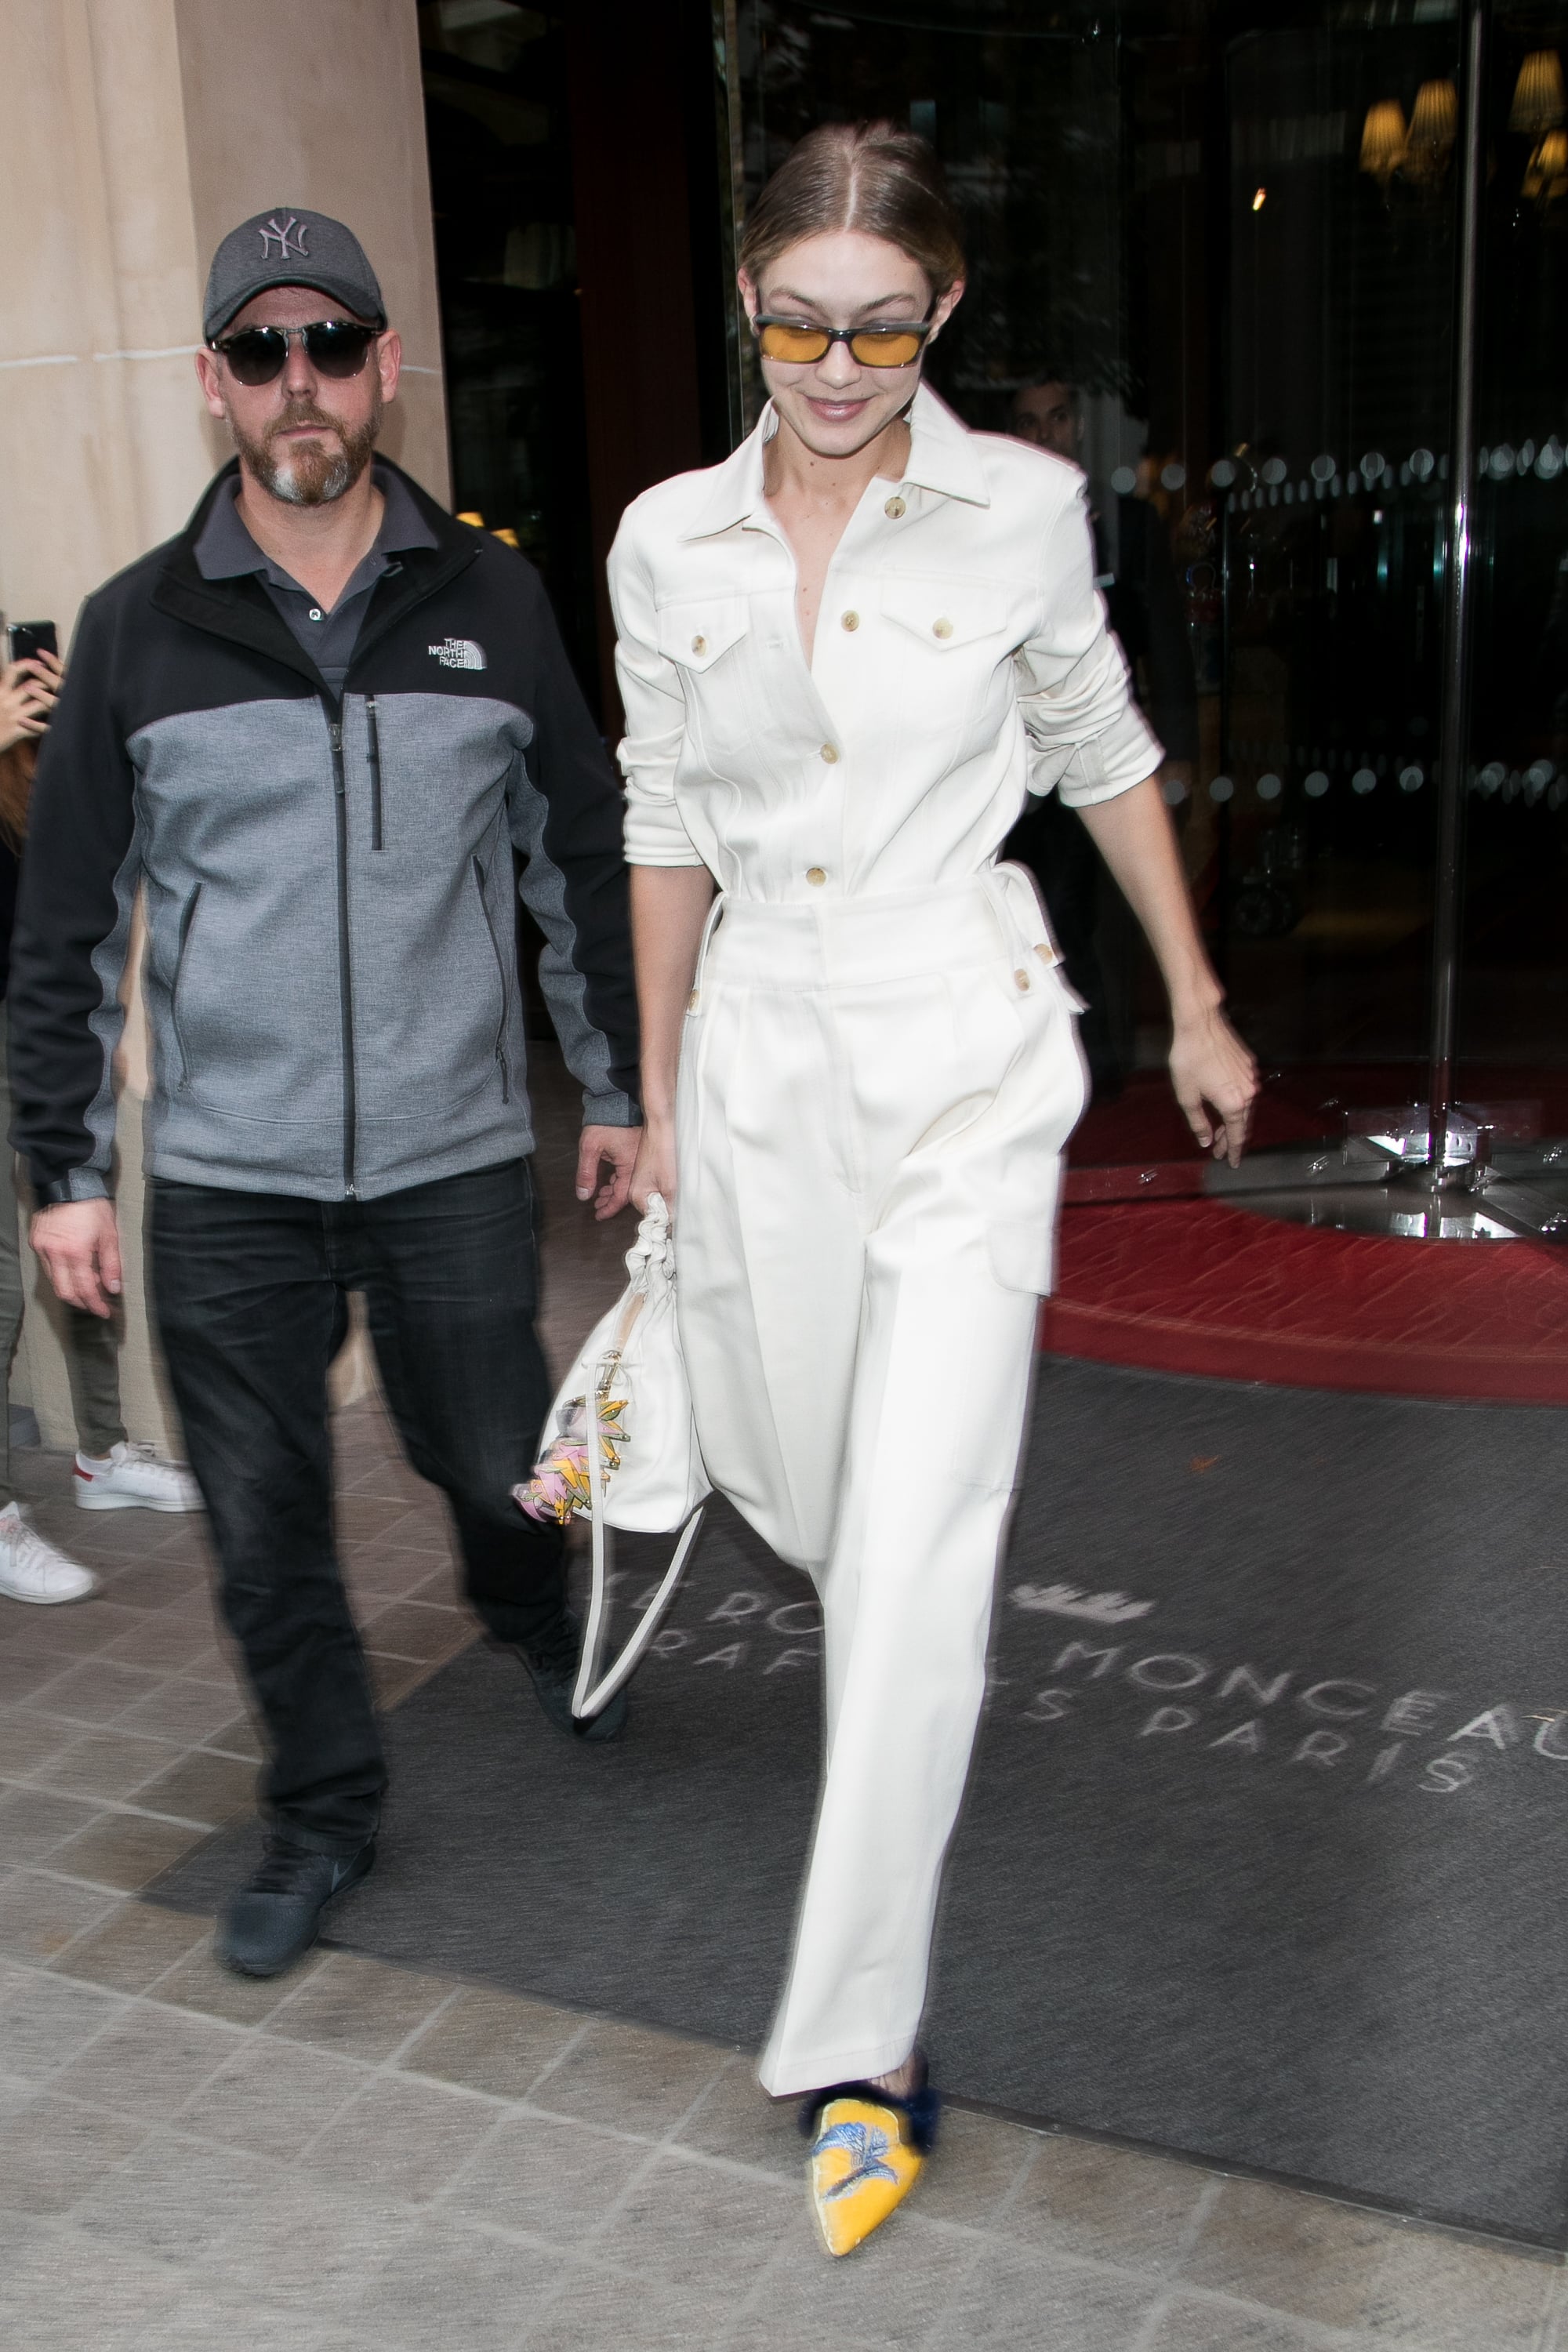 Gigi Hadid Pairs Her Go-To Prada Tote Bag With the Sneakers of the